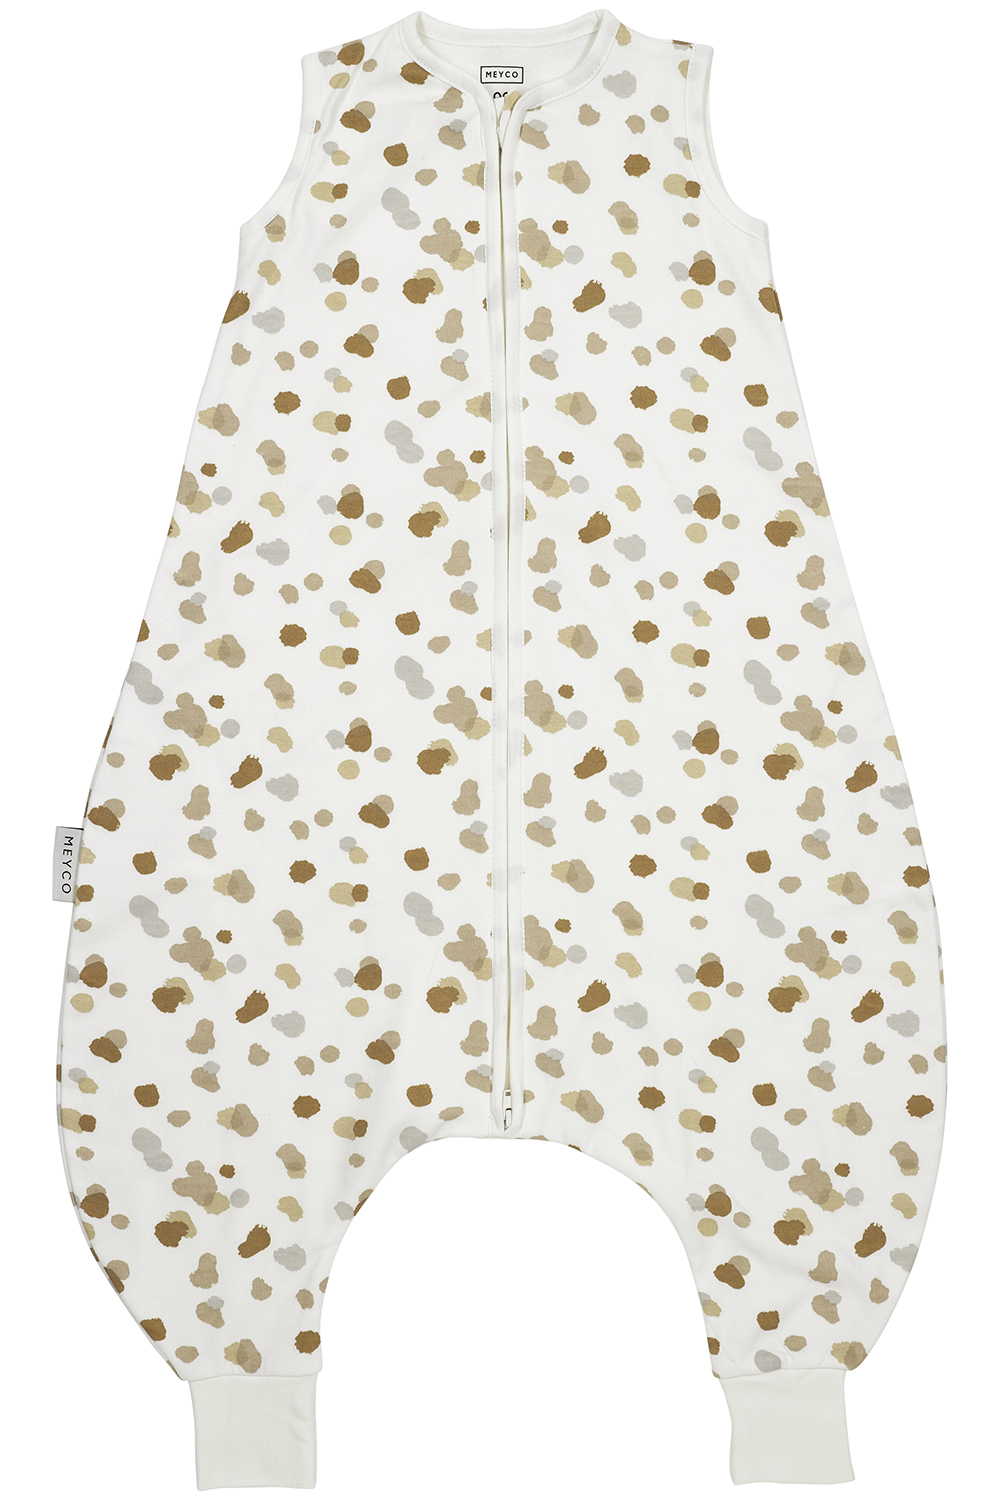 Baby zomer slaapoverall jumper Stains - sand - 92cm